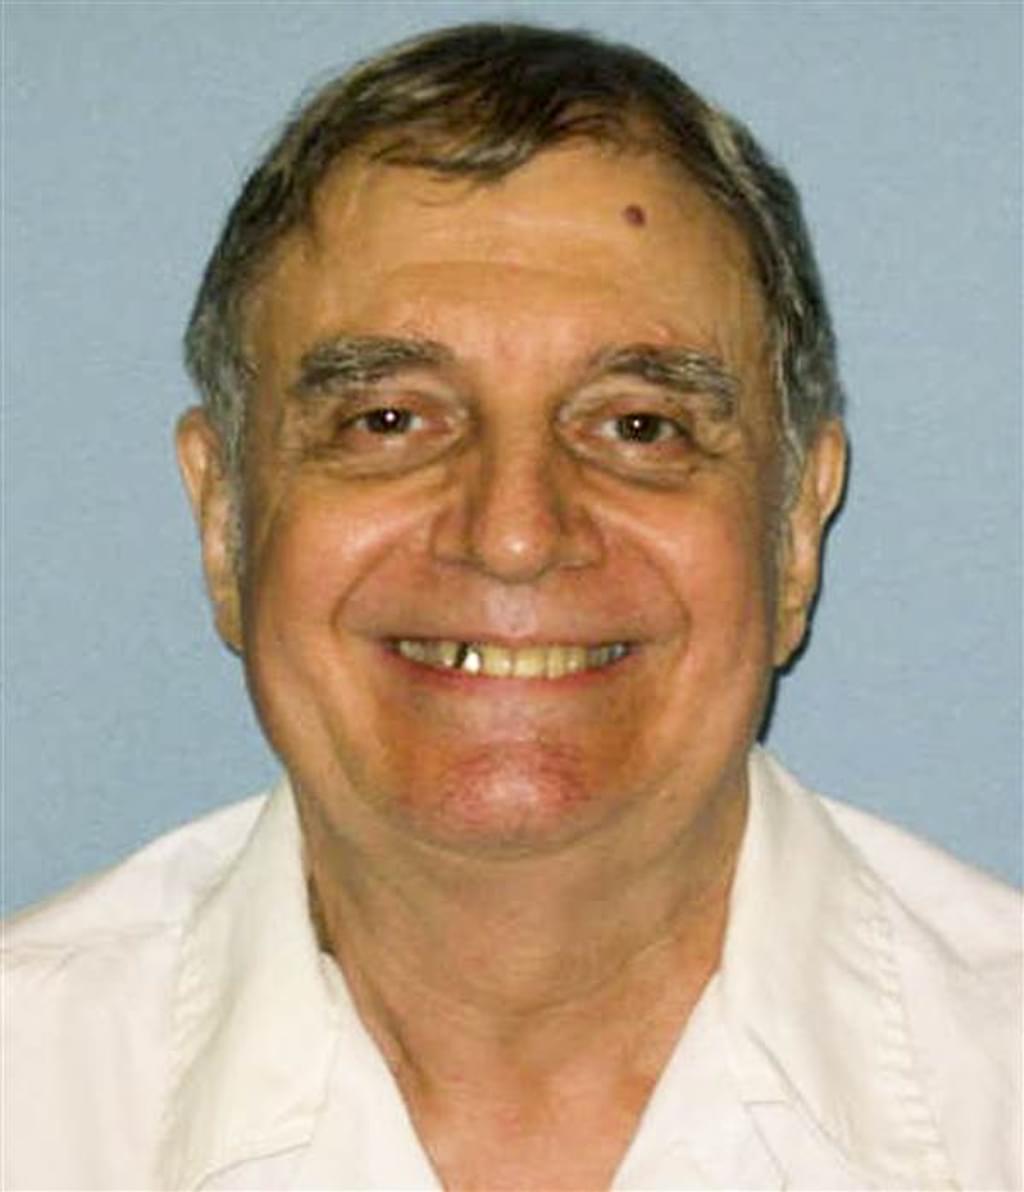 Alabama Prisoner Facing Eighth Execution Date Claims Innocence, Challenges Execution Procedures